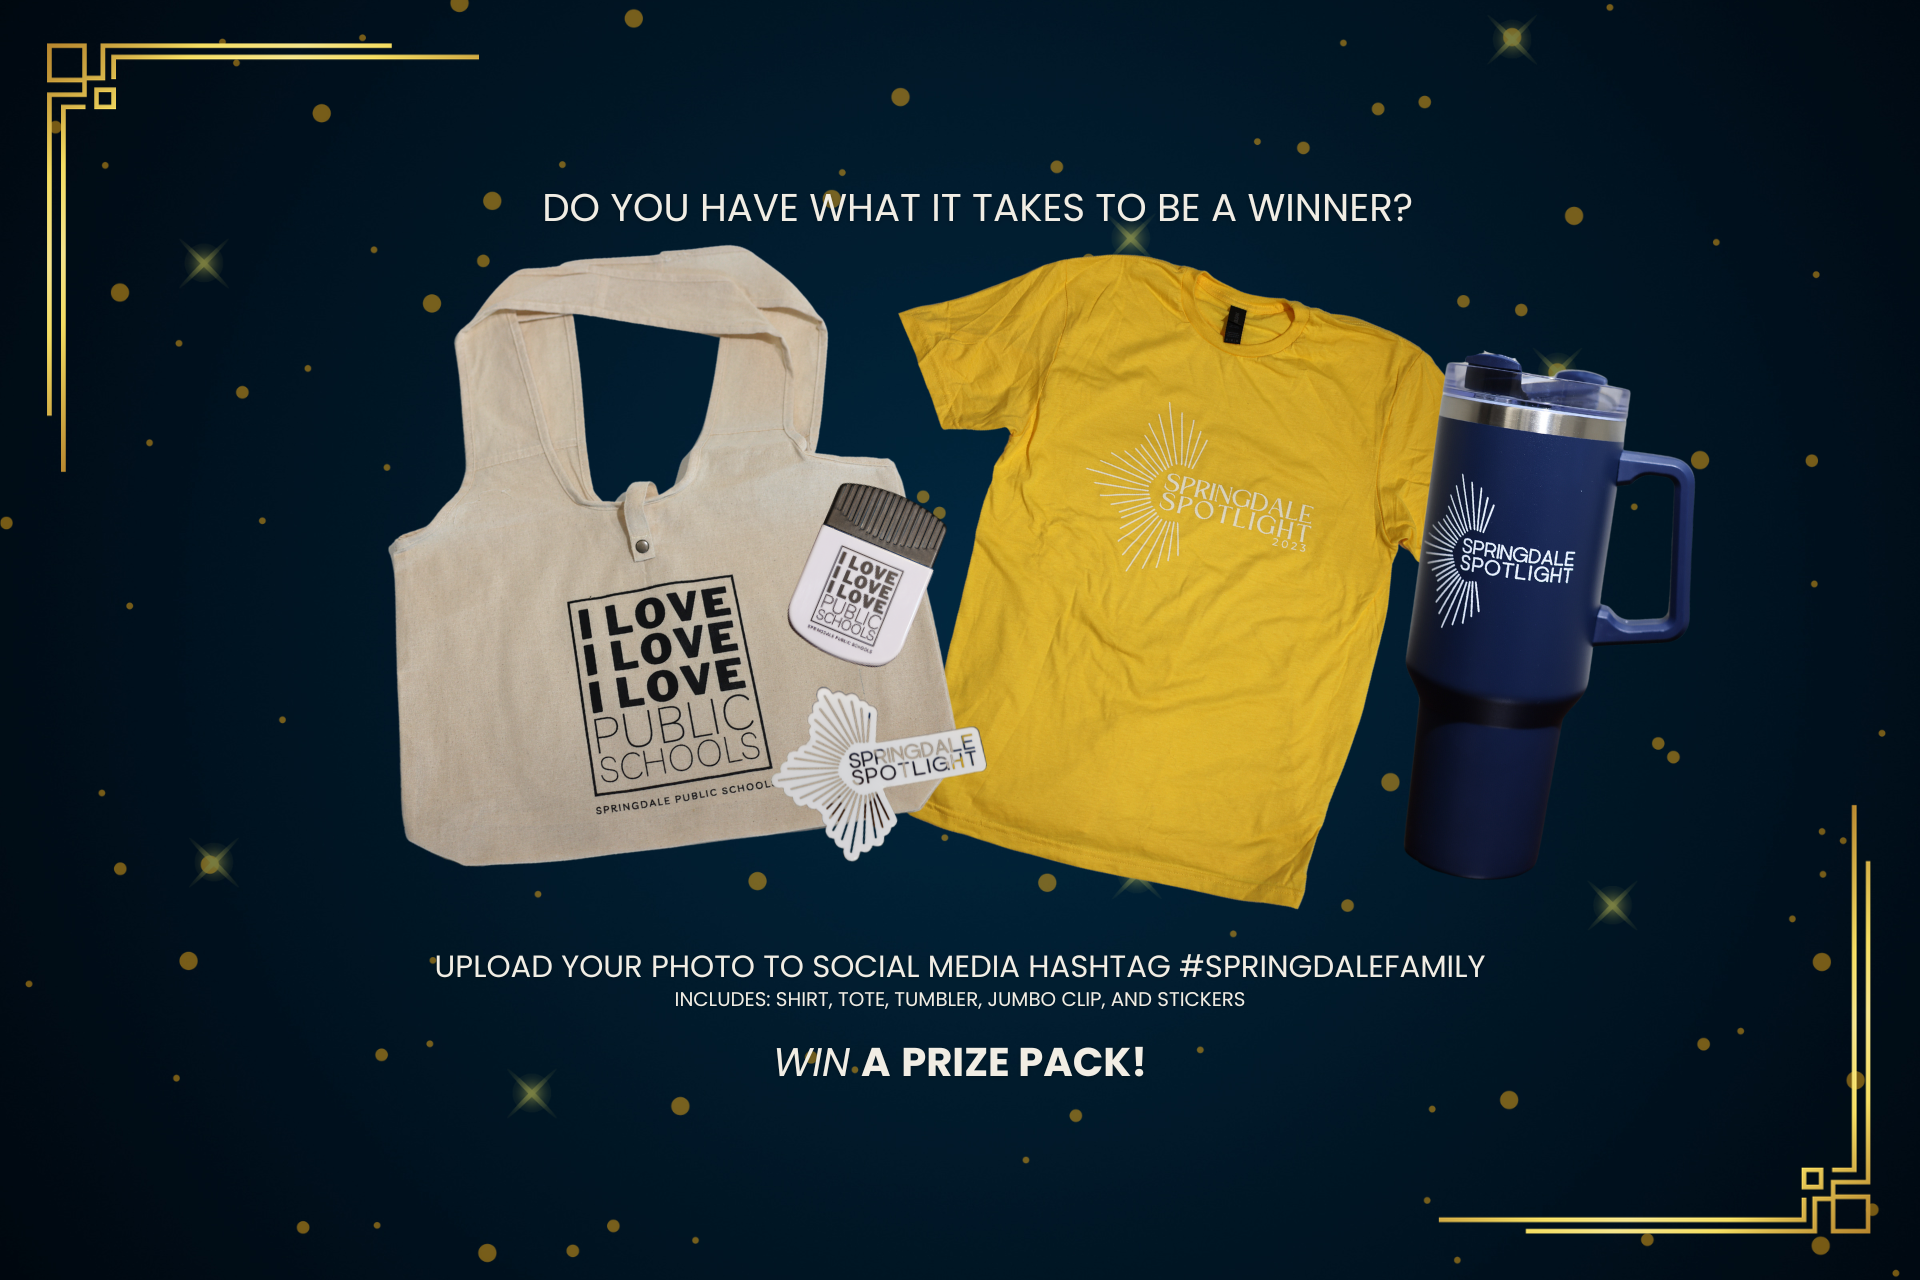 Image of the prize pack for the springdale spotlight contest